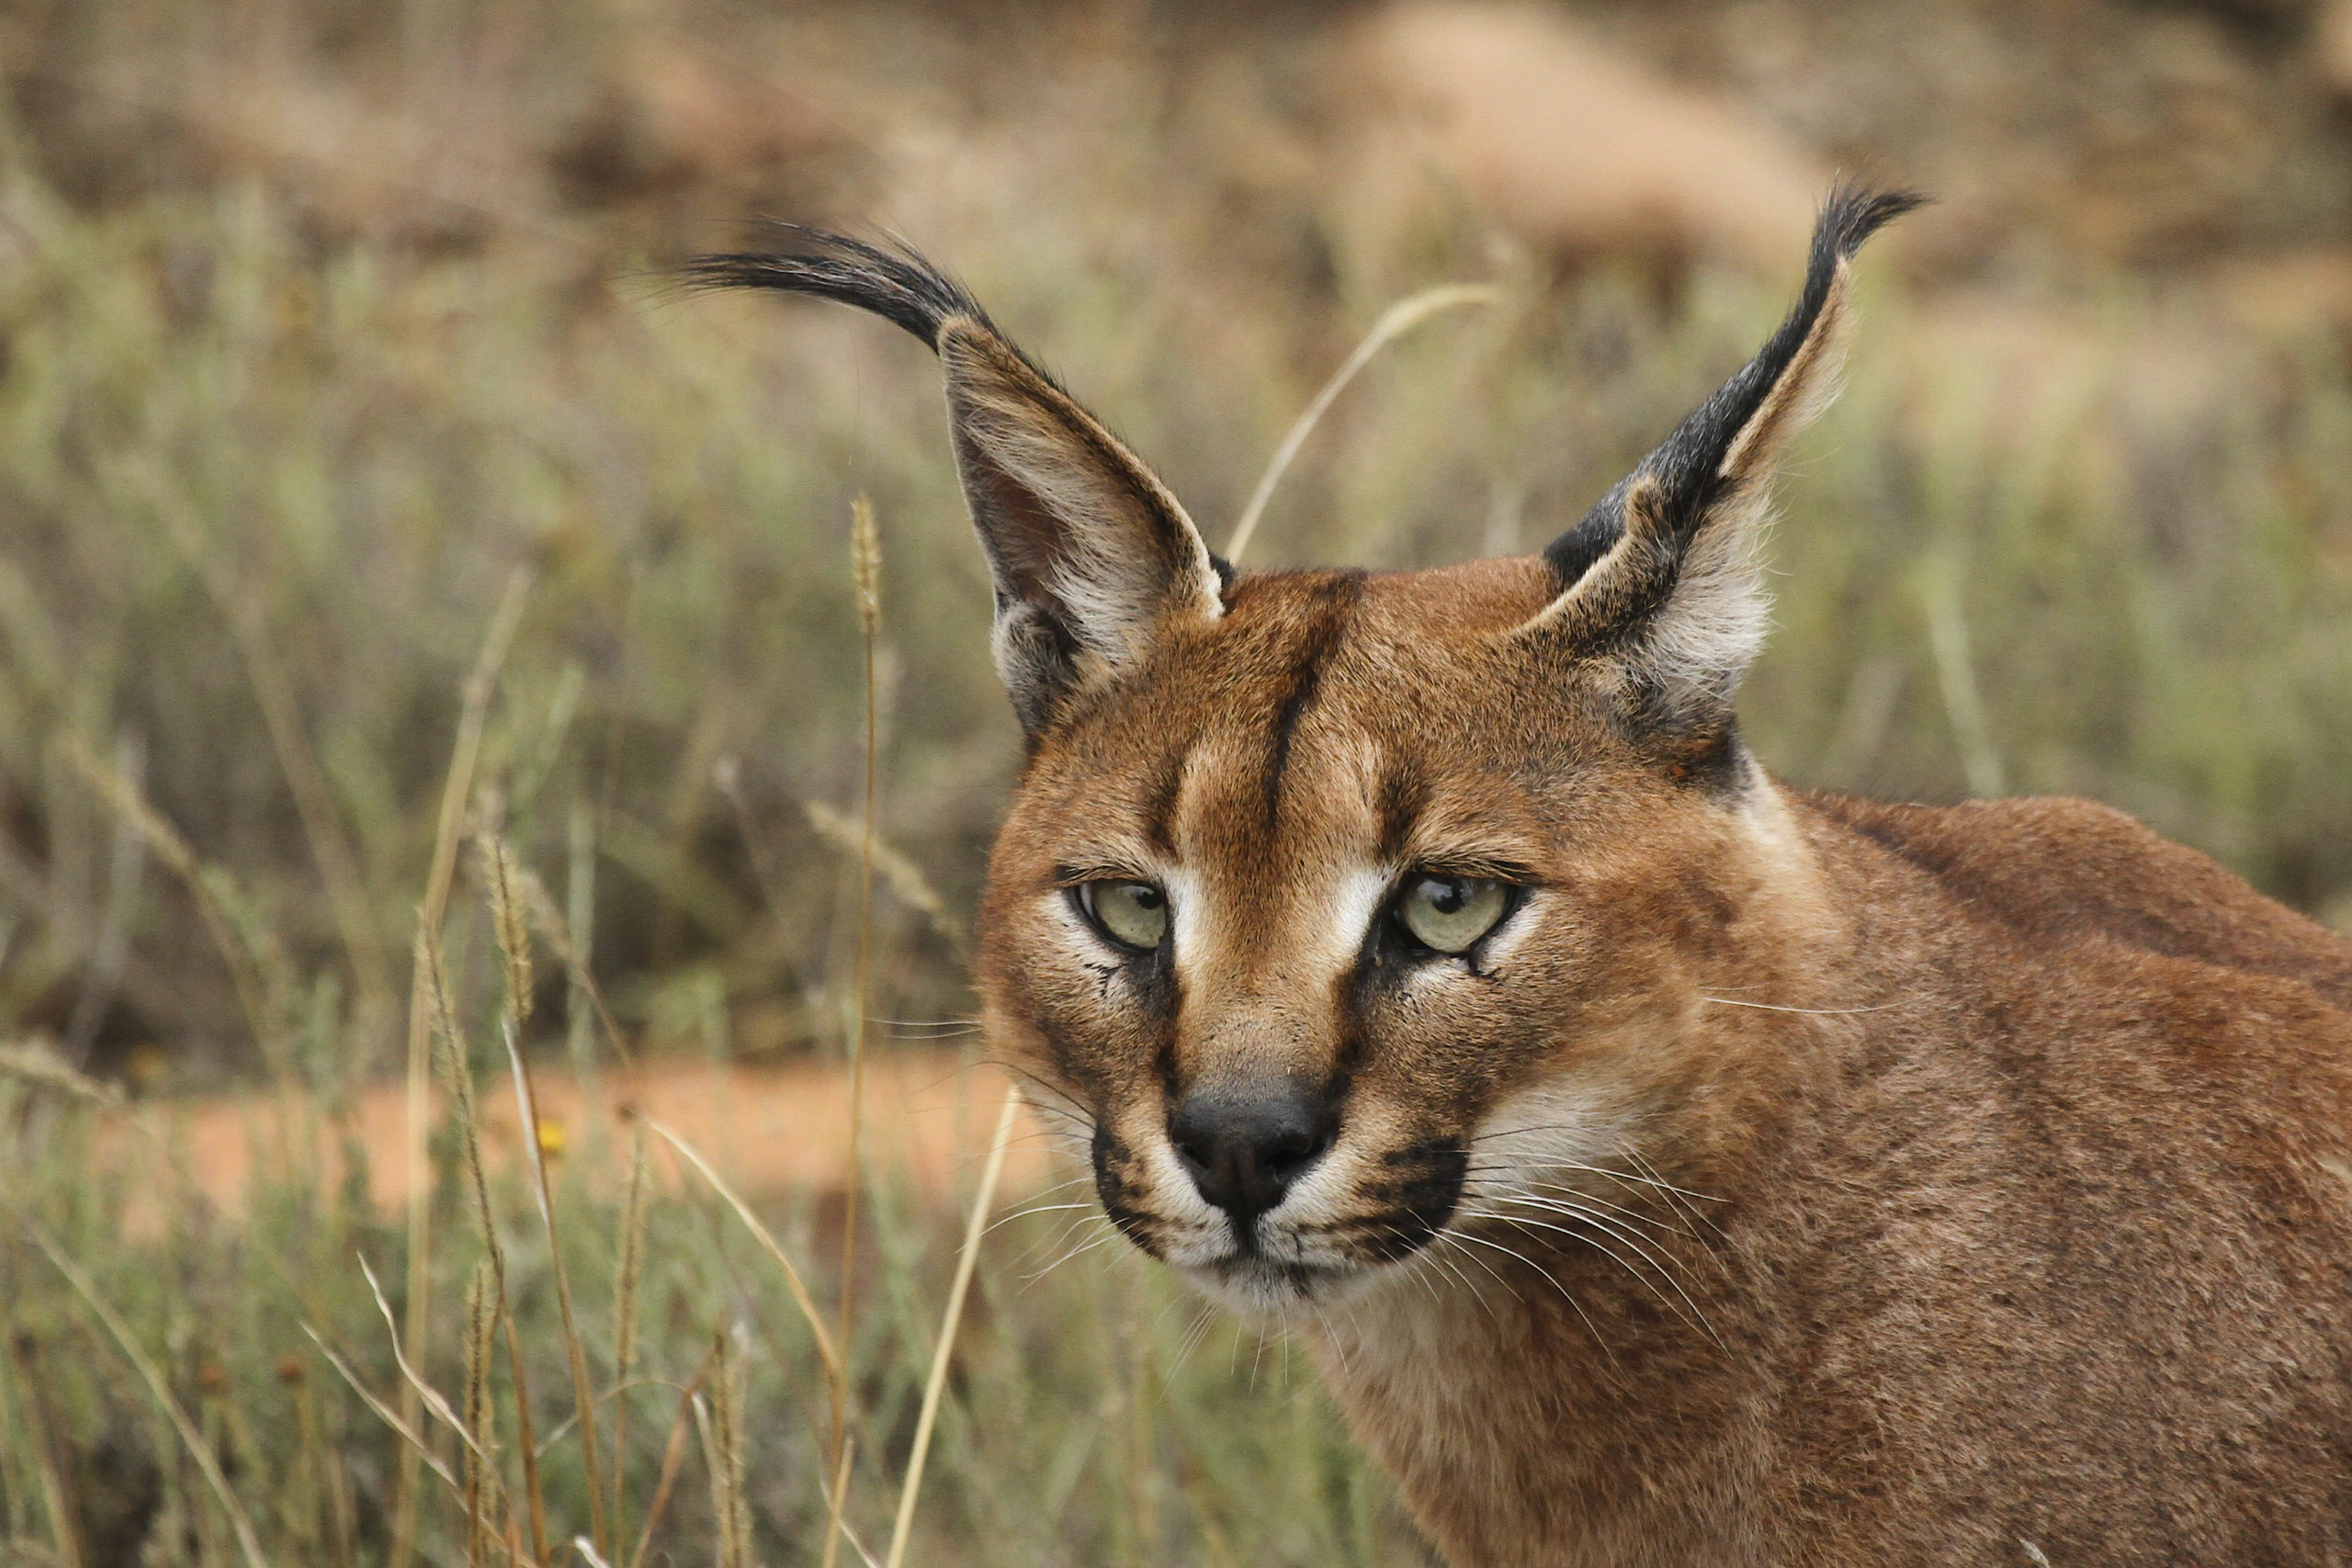 18 to 35 Caracals found in Ranthambore National Park